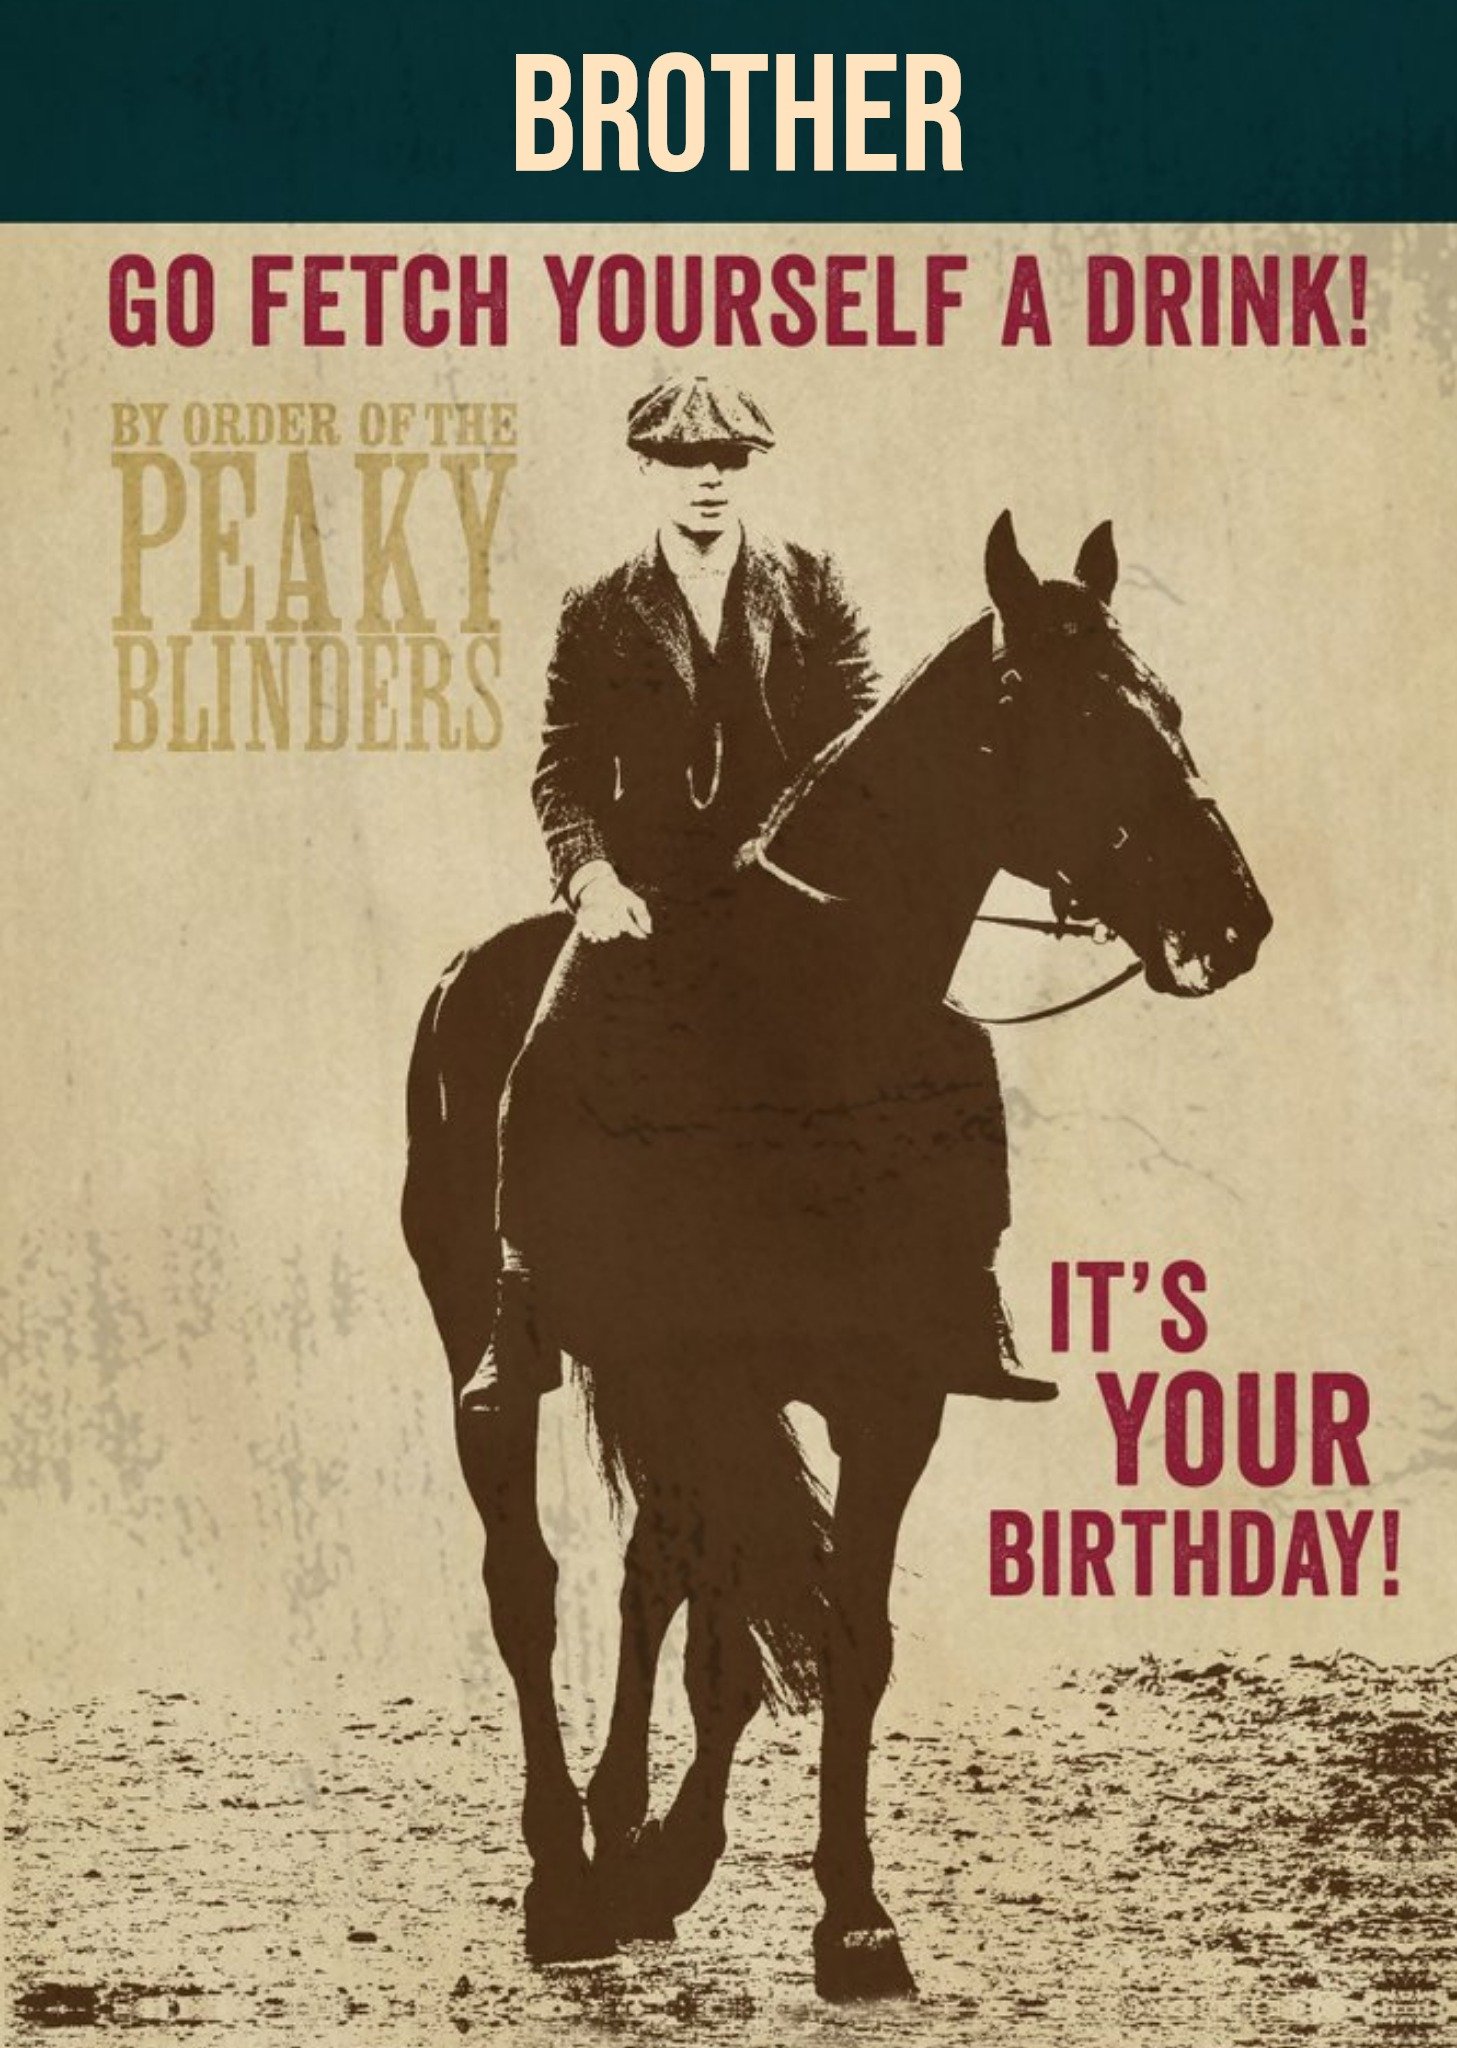 Peaky Blinders Go Fetch Yourself A Drink Brother Birthday Card, Large